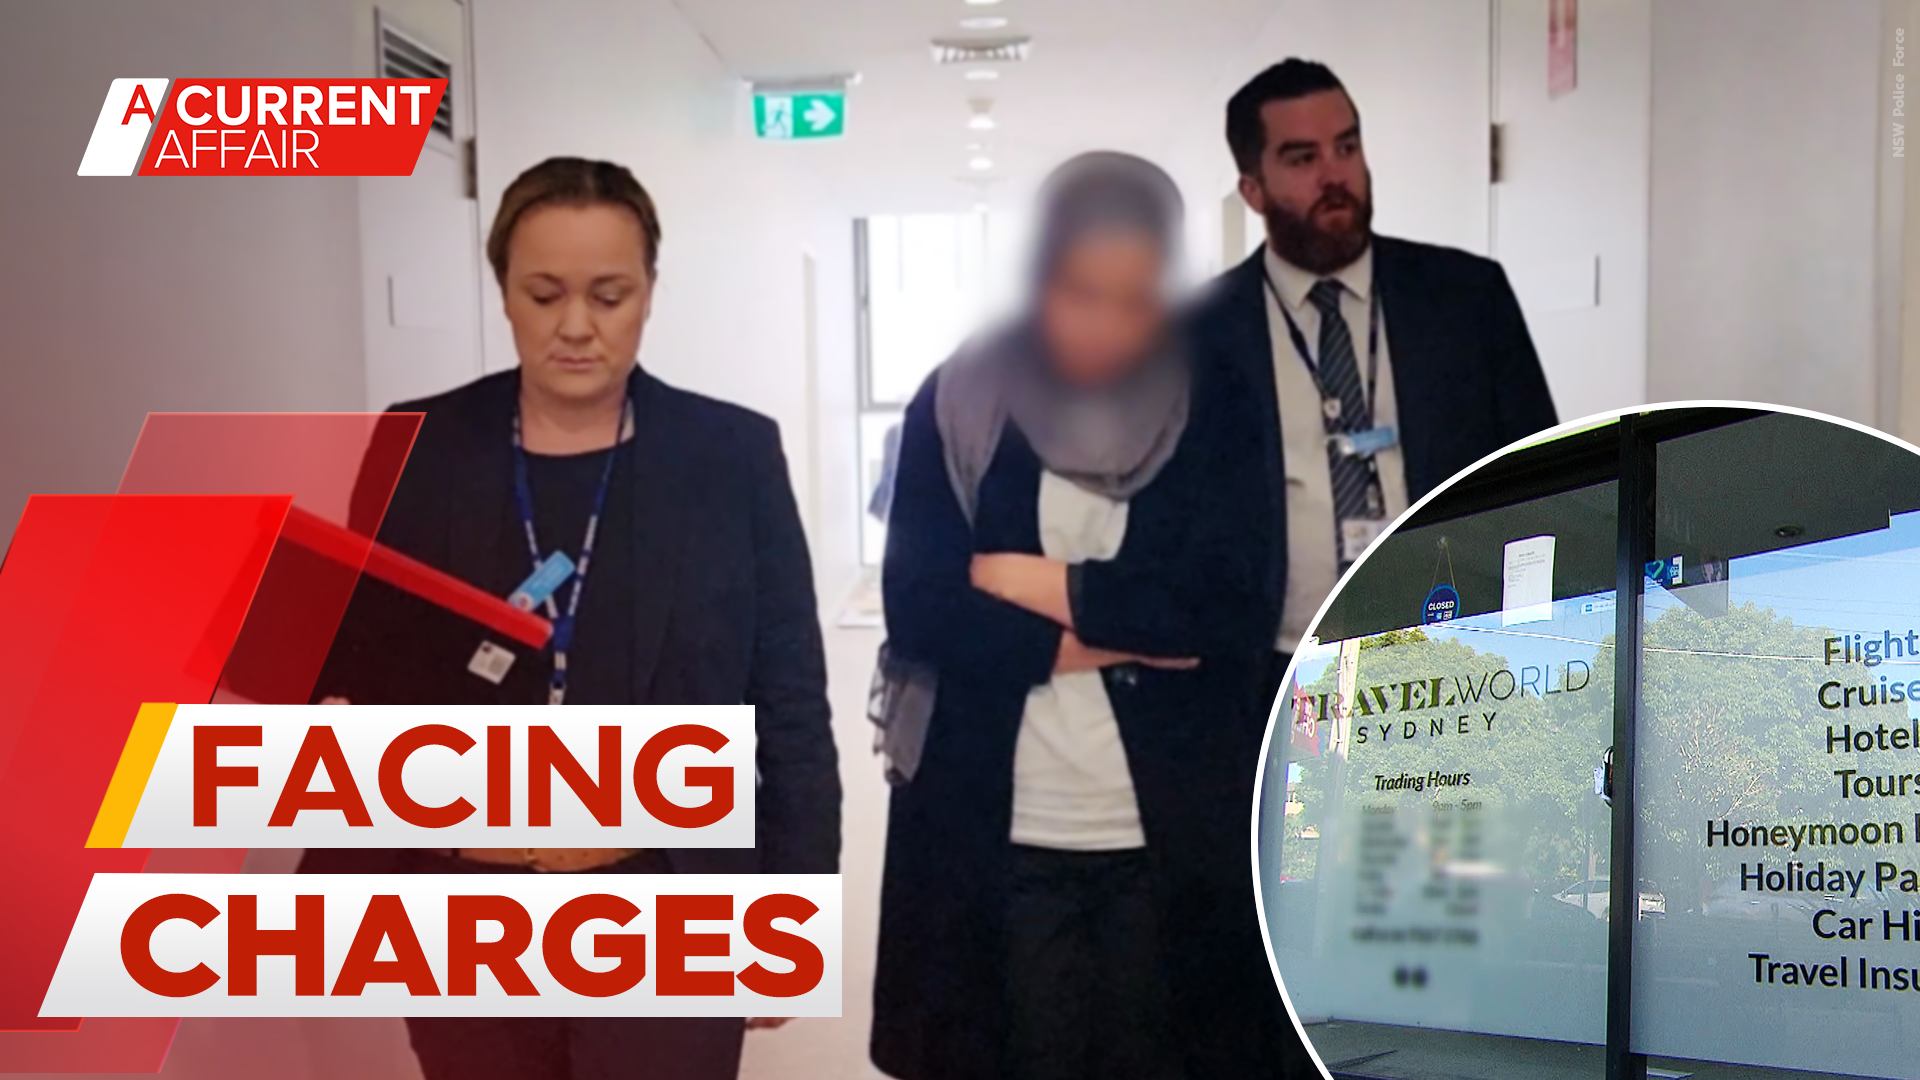 Arrest vision shows moment police move in on fraud-accused Sydney travel agent